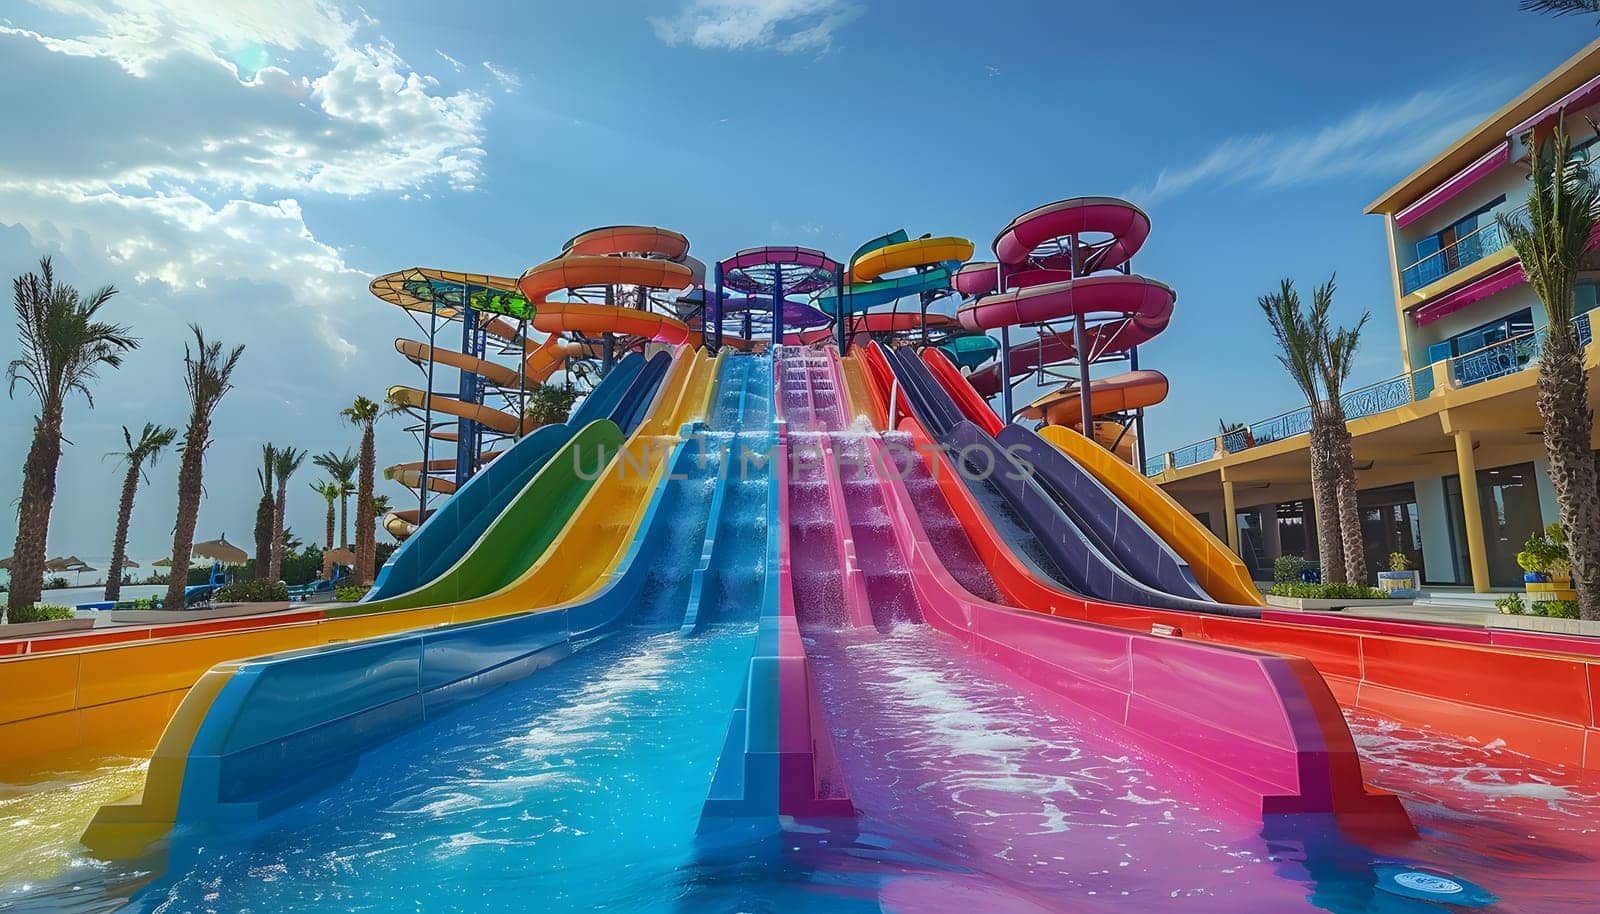 Experience a colorful water world at our water park with a variety of slides set against a backdrop of blue skies and white clouds. Perfect for outdoor recreation and leisure in the city